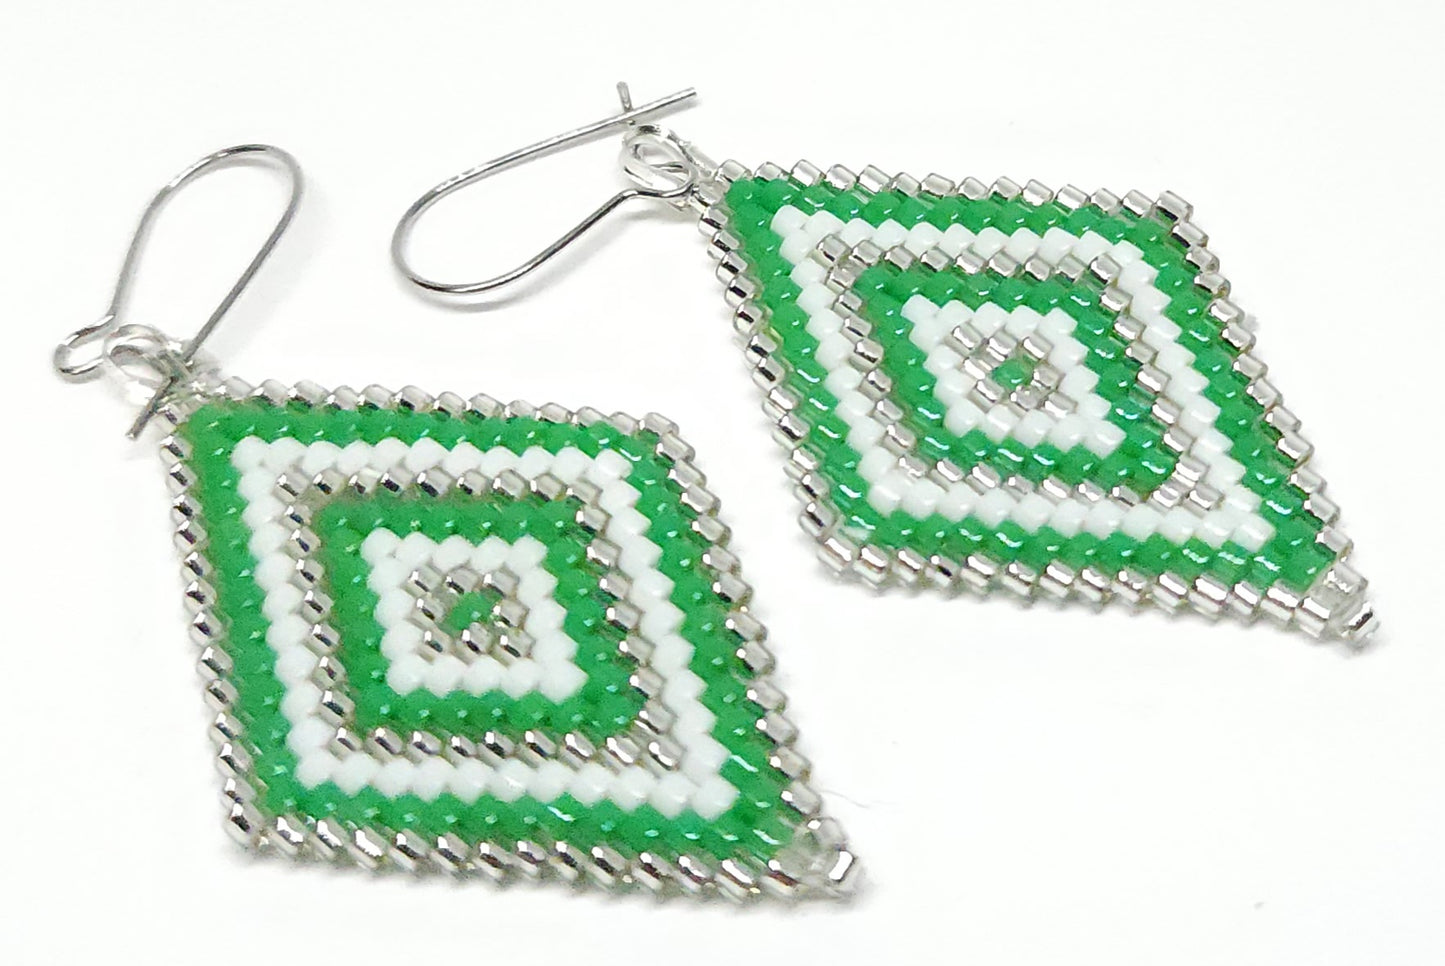 Green Brick stitch Dangles with surgical stainless steel hooks